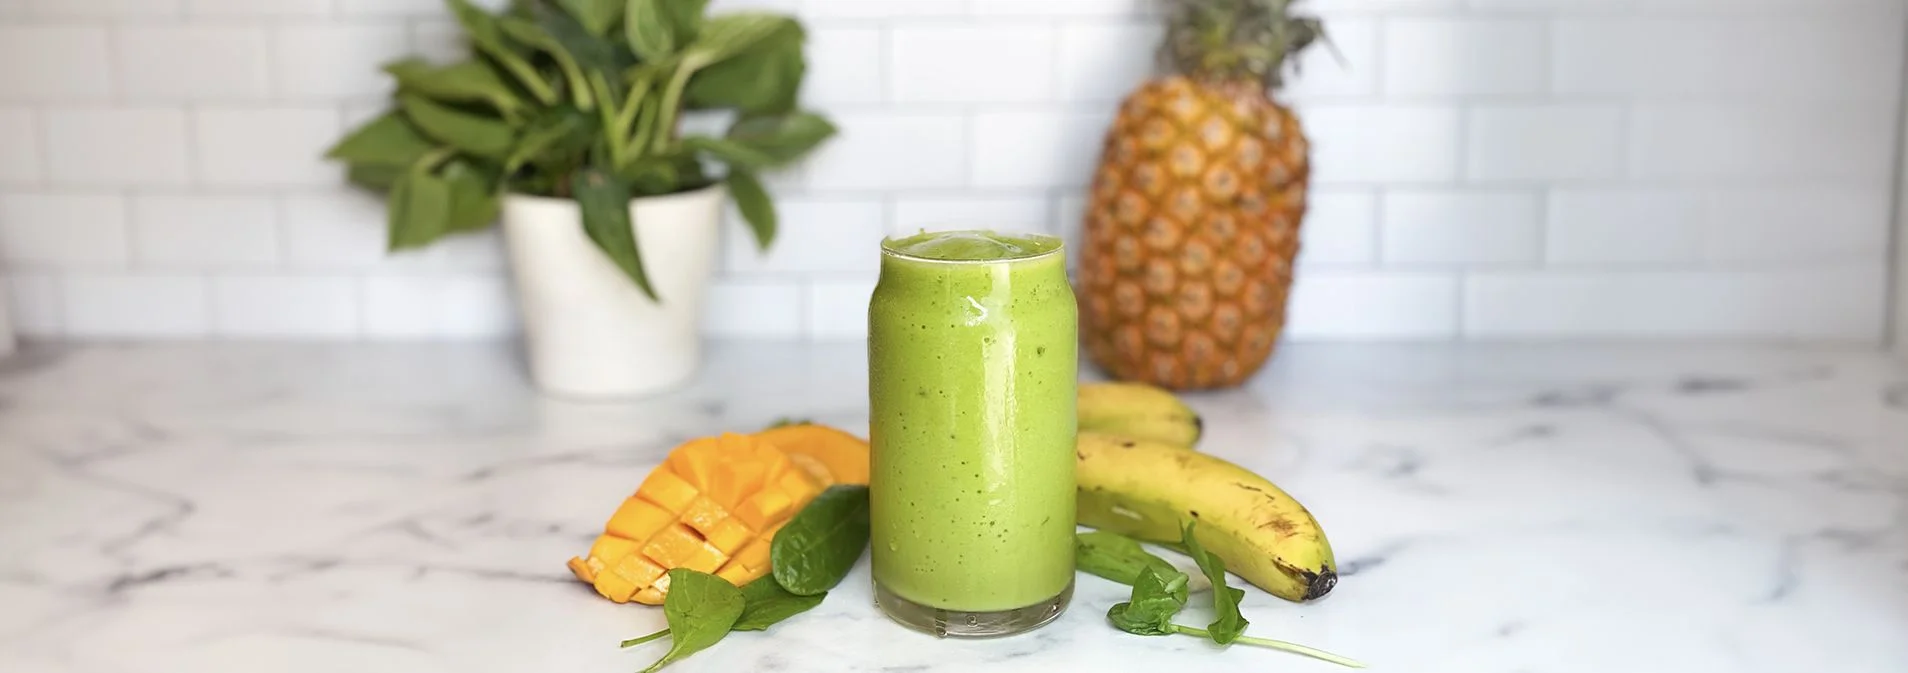 A clear glass filled with a green smoothie mixture. Mango, banana, and spinach surround glass. Pineapple and houseplant in background.